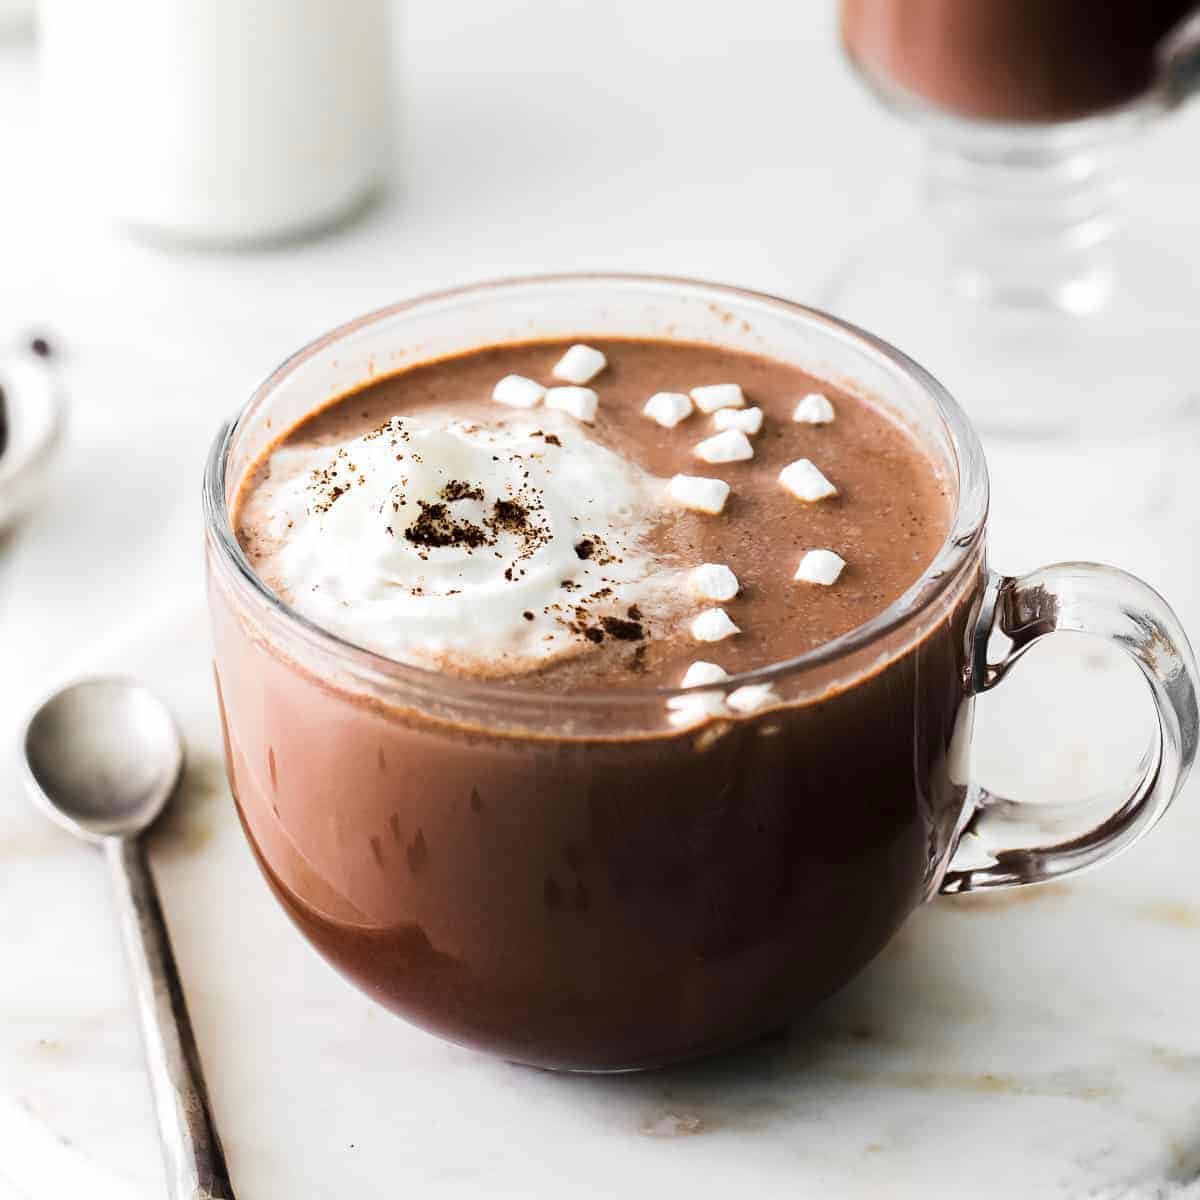 https://fitfoodiefinds.com/wp-content/uploads/2021/11/Hot-Chocolate-01.jpg